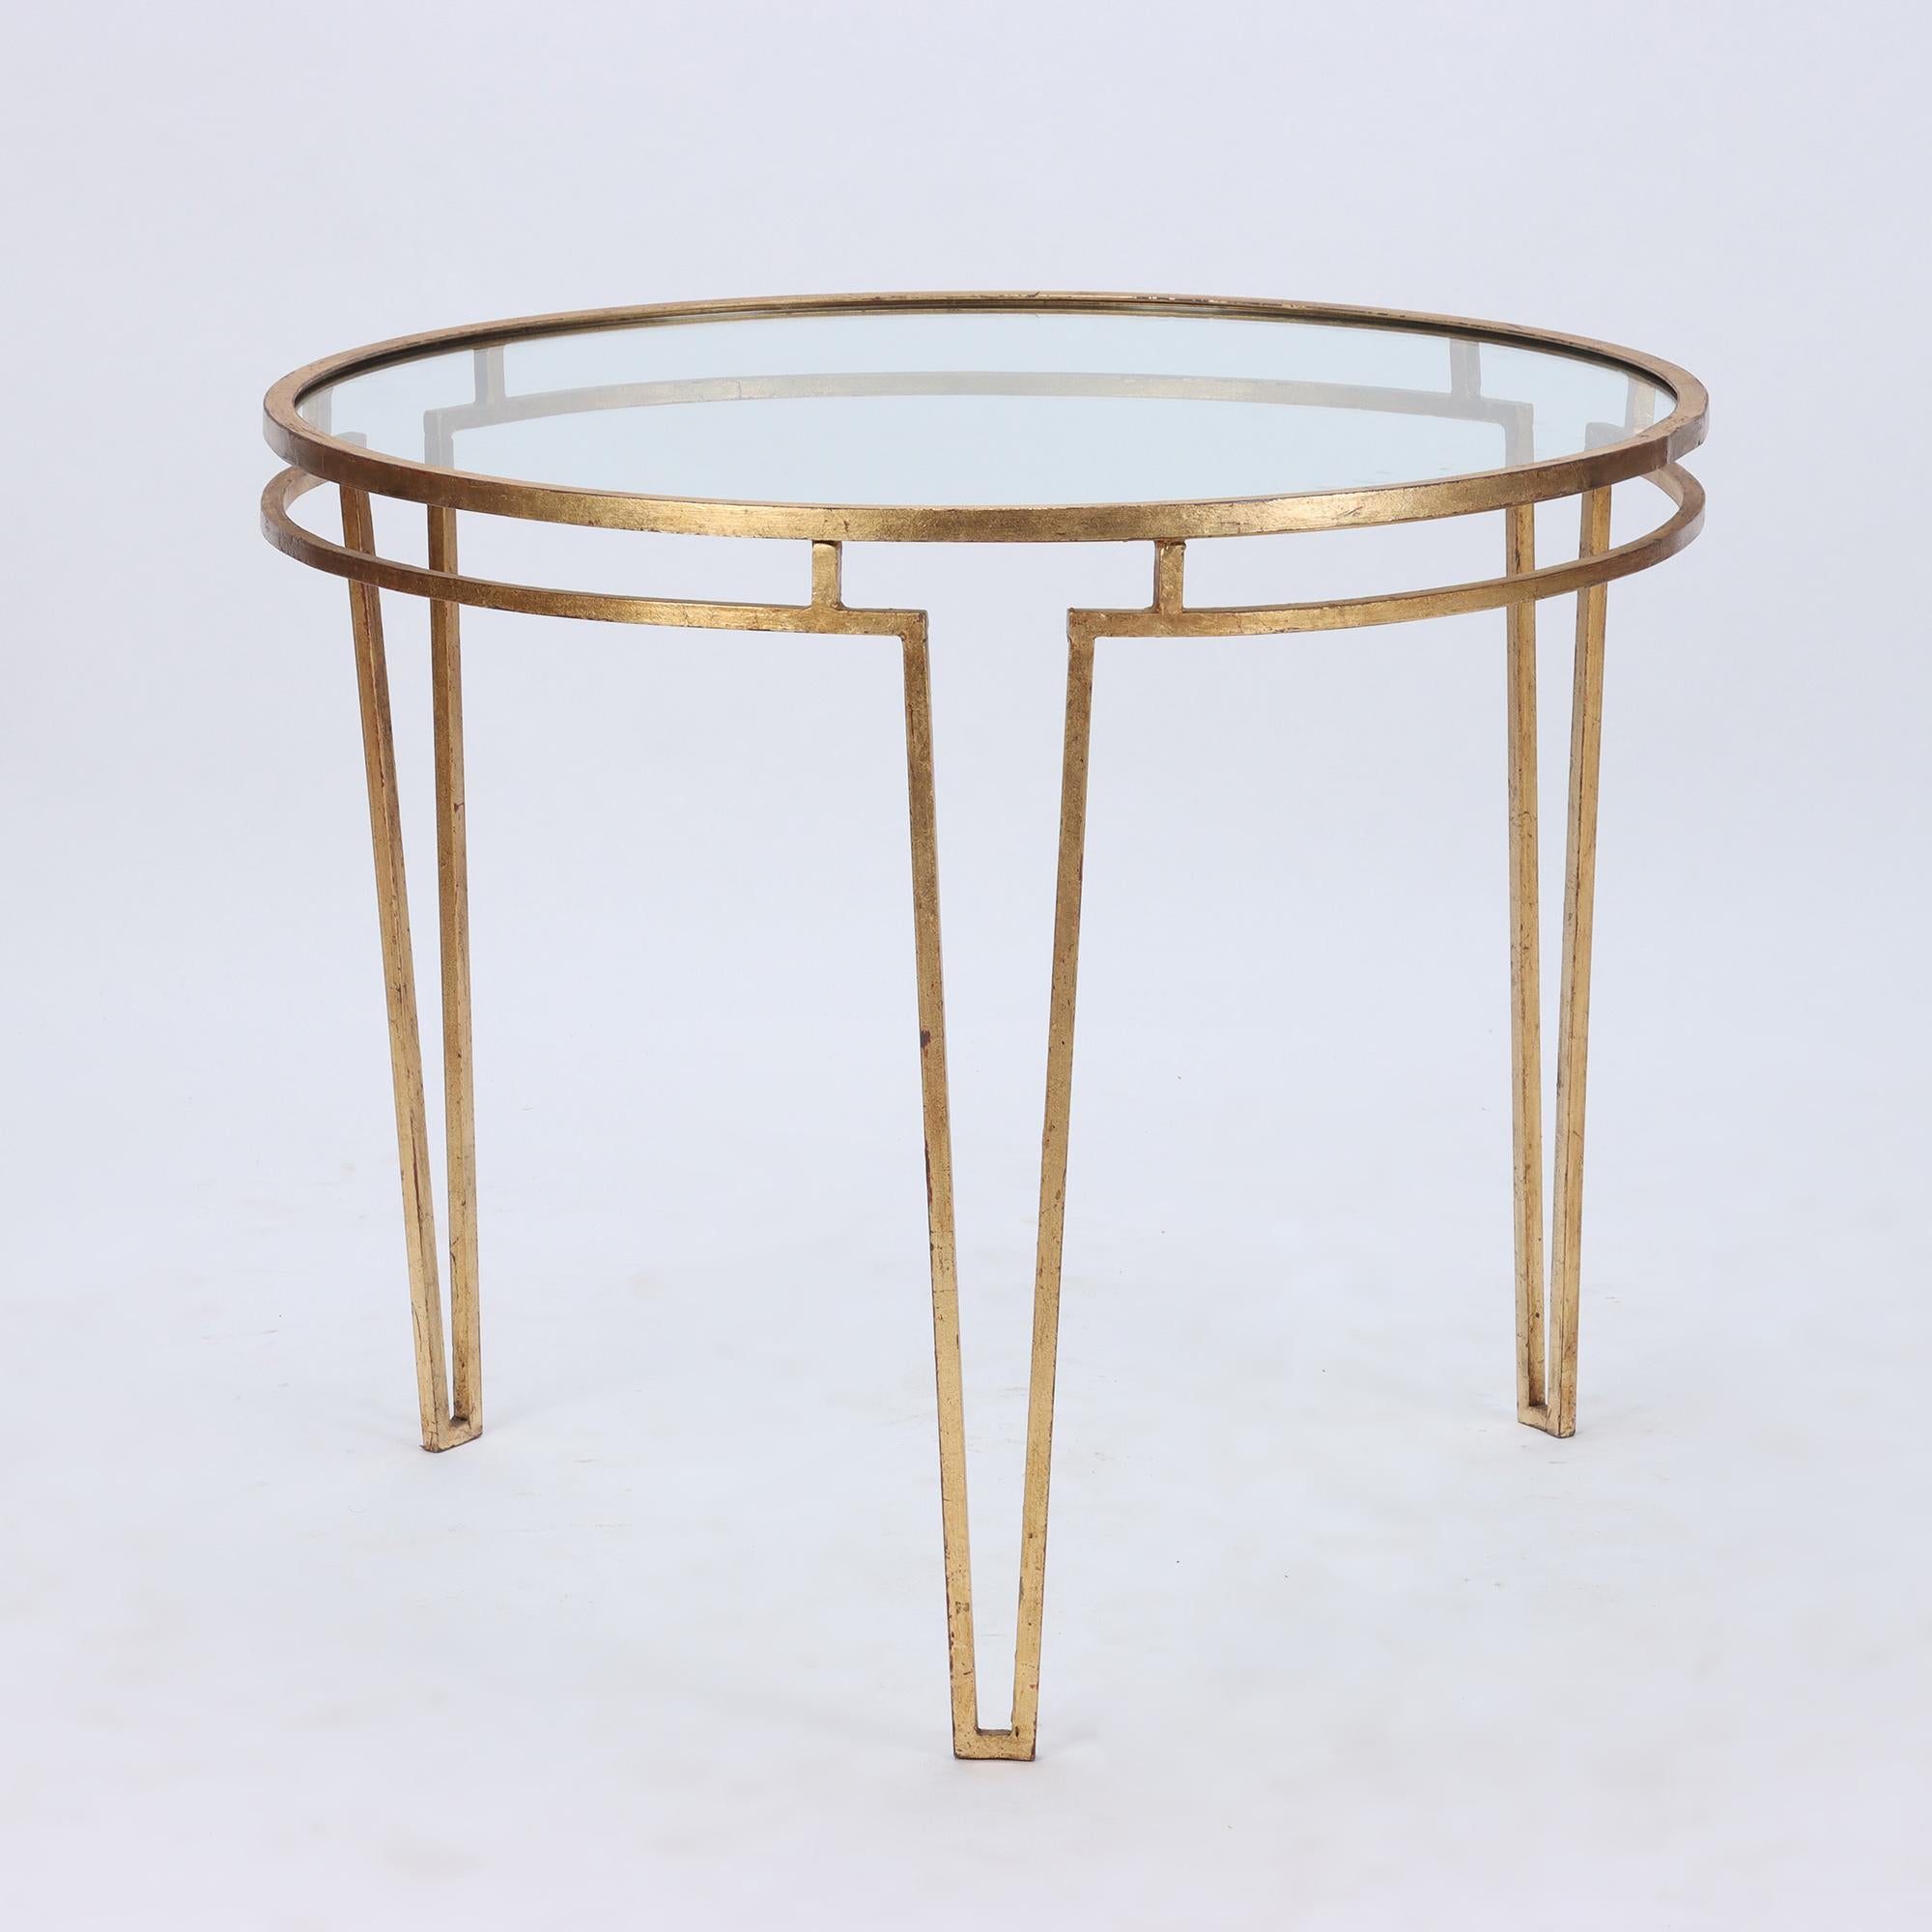 A beautiful Neoclassical gilt iron table with a glass top, in the manner of Jean Royere, C 1950.